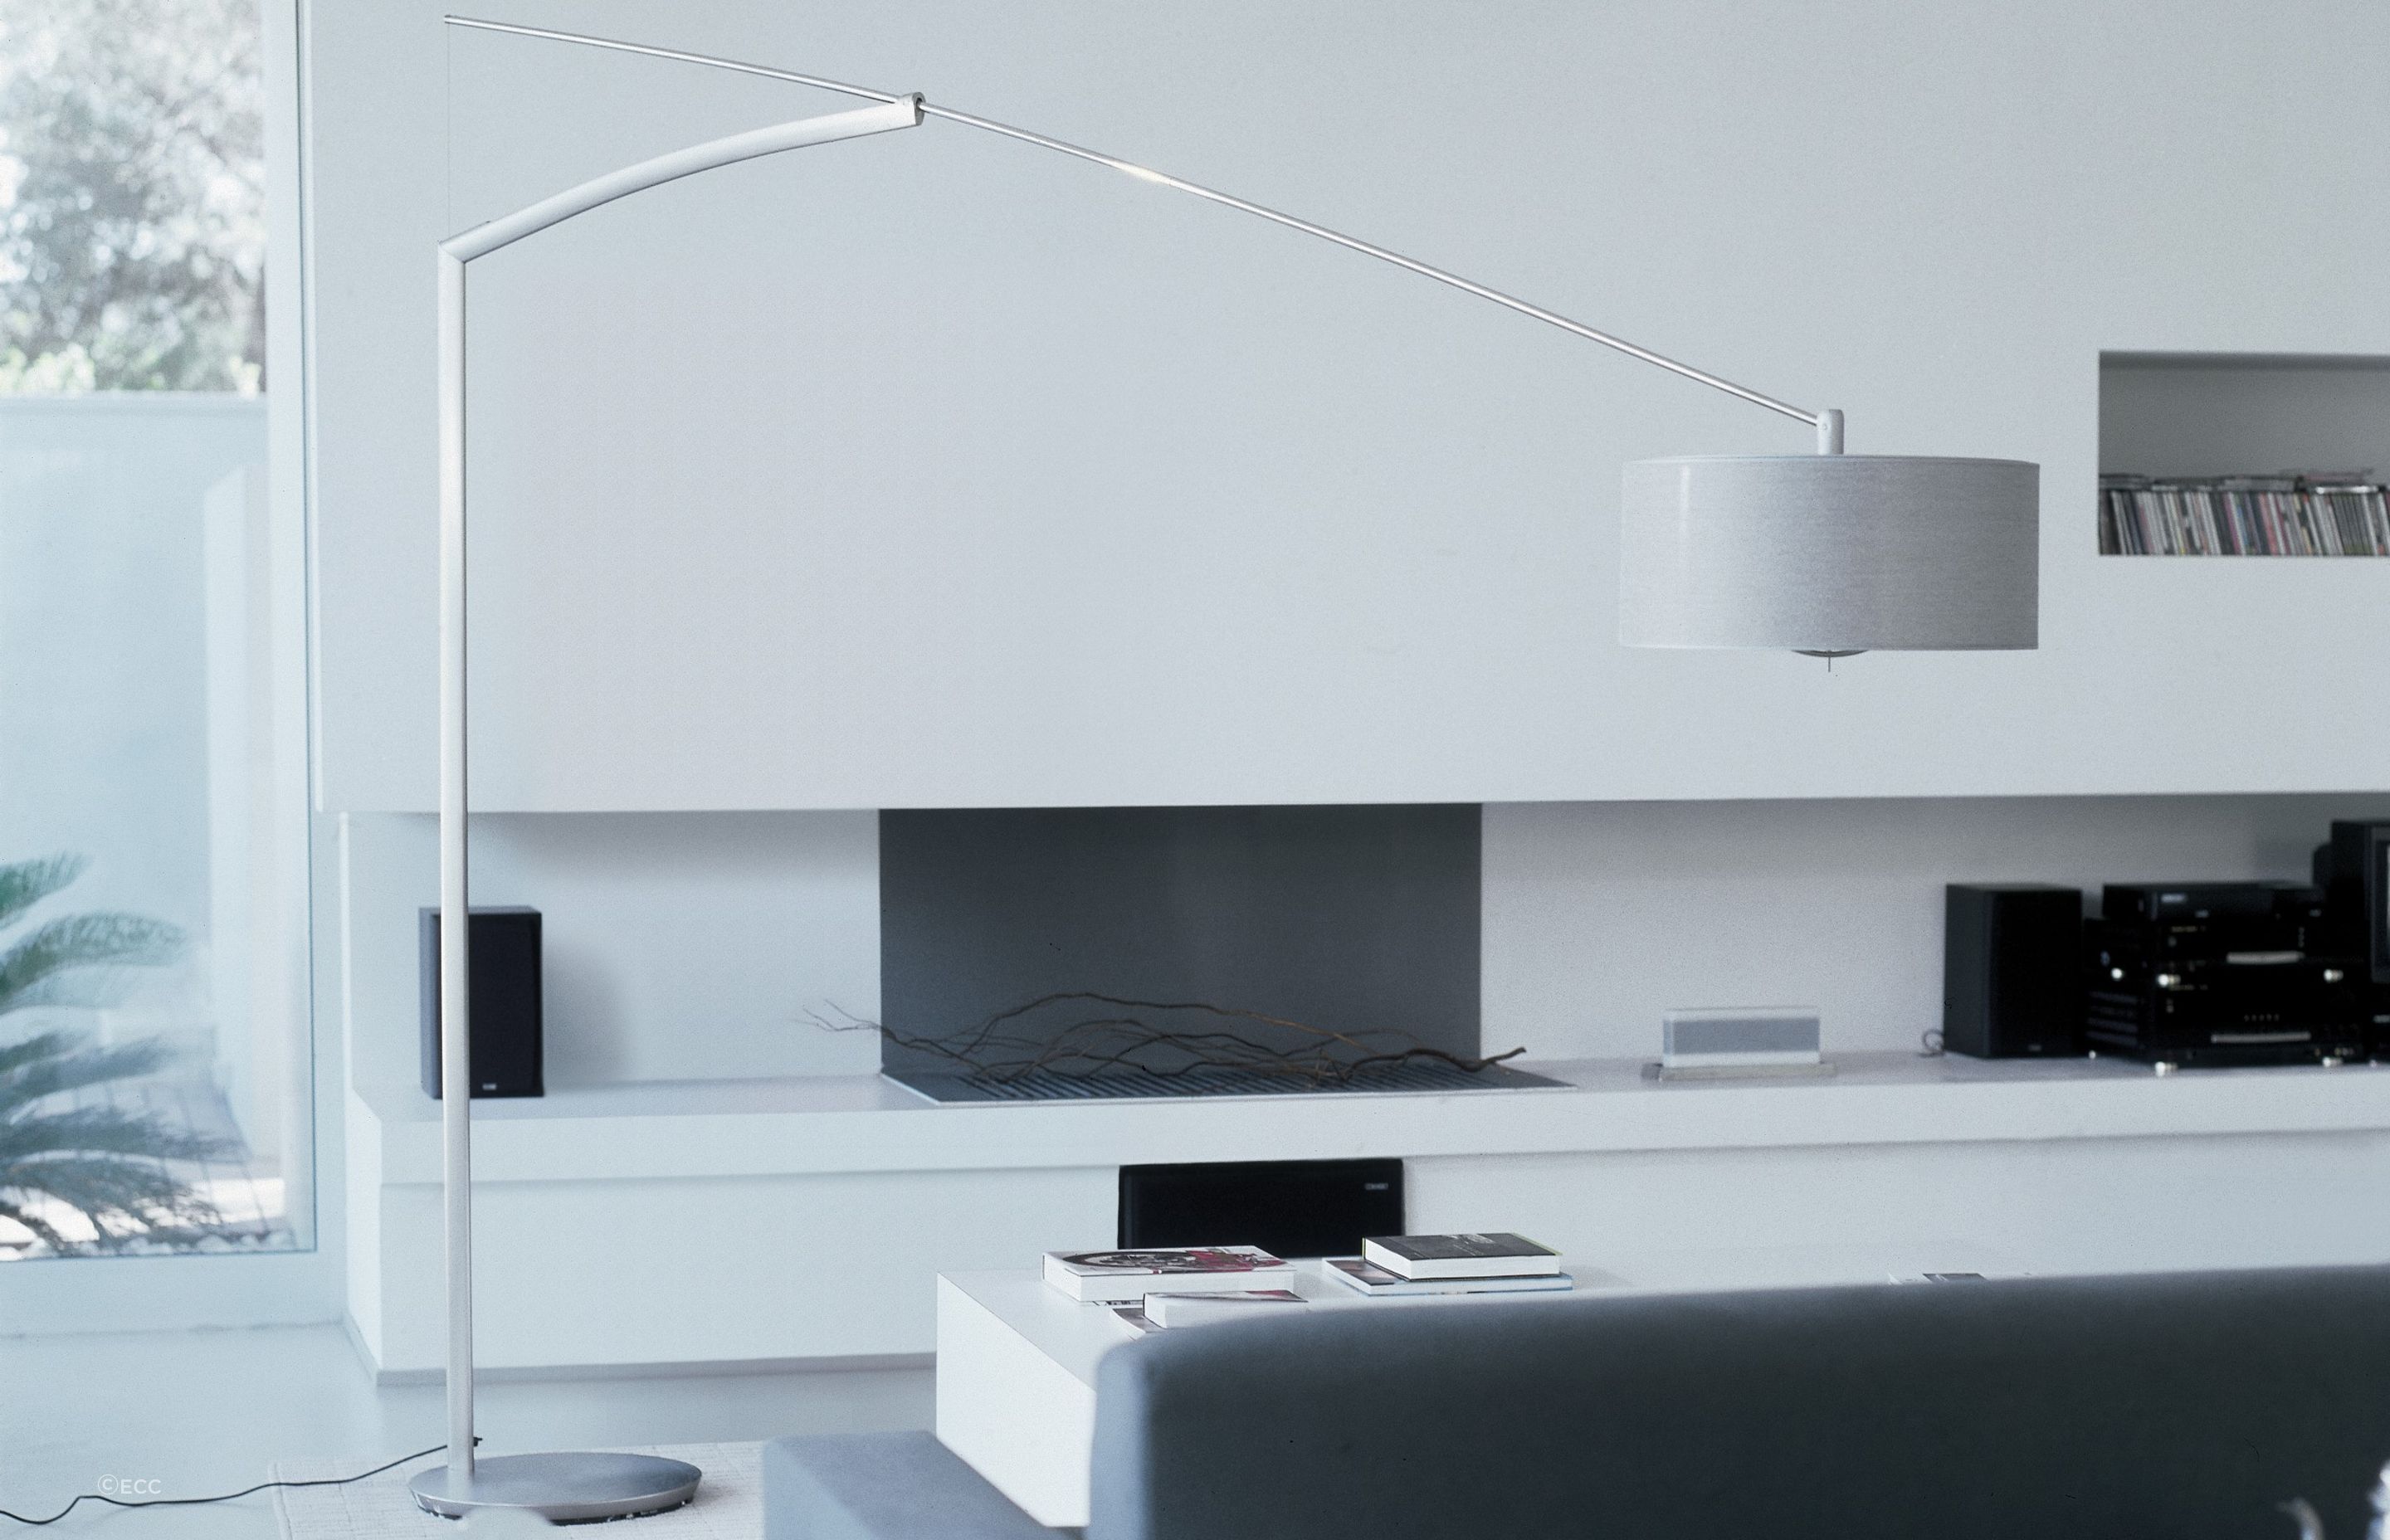 A stunning floor lamp like the Balance Floor Lamp by Jordi Viladrell for Vibia can bring a room together.